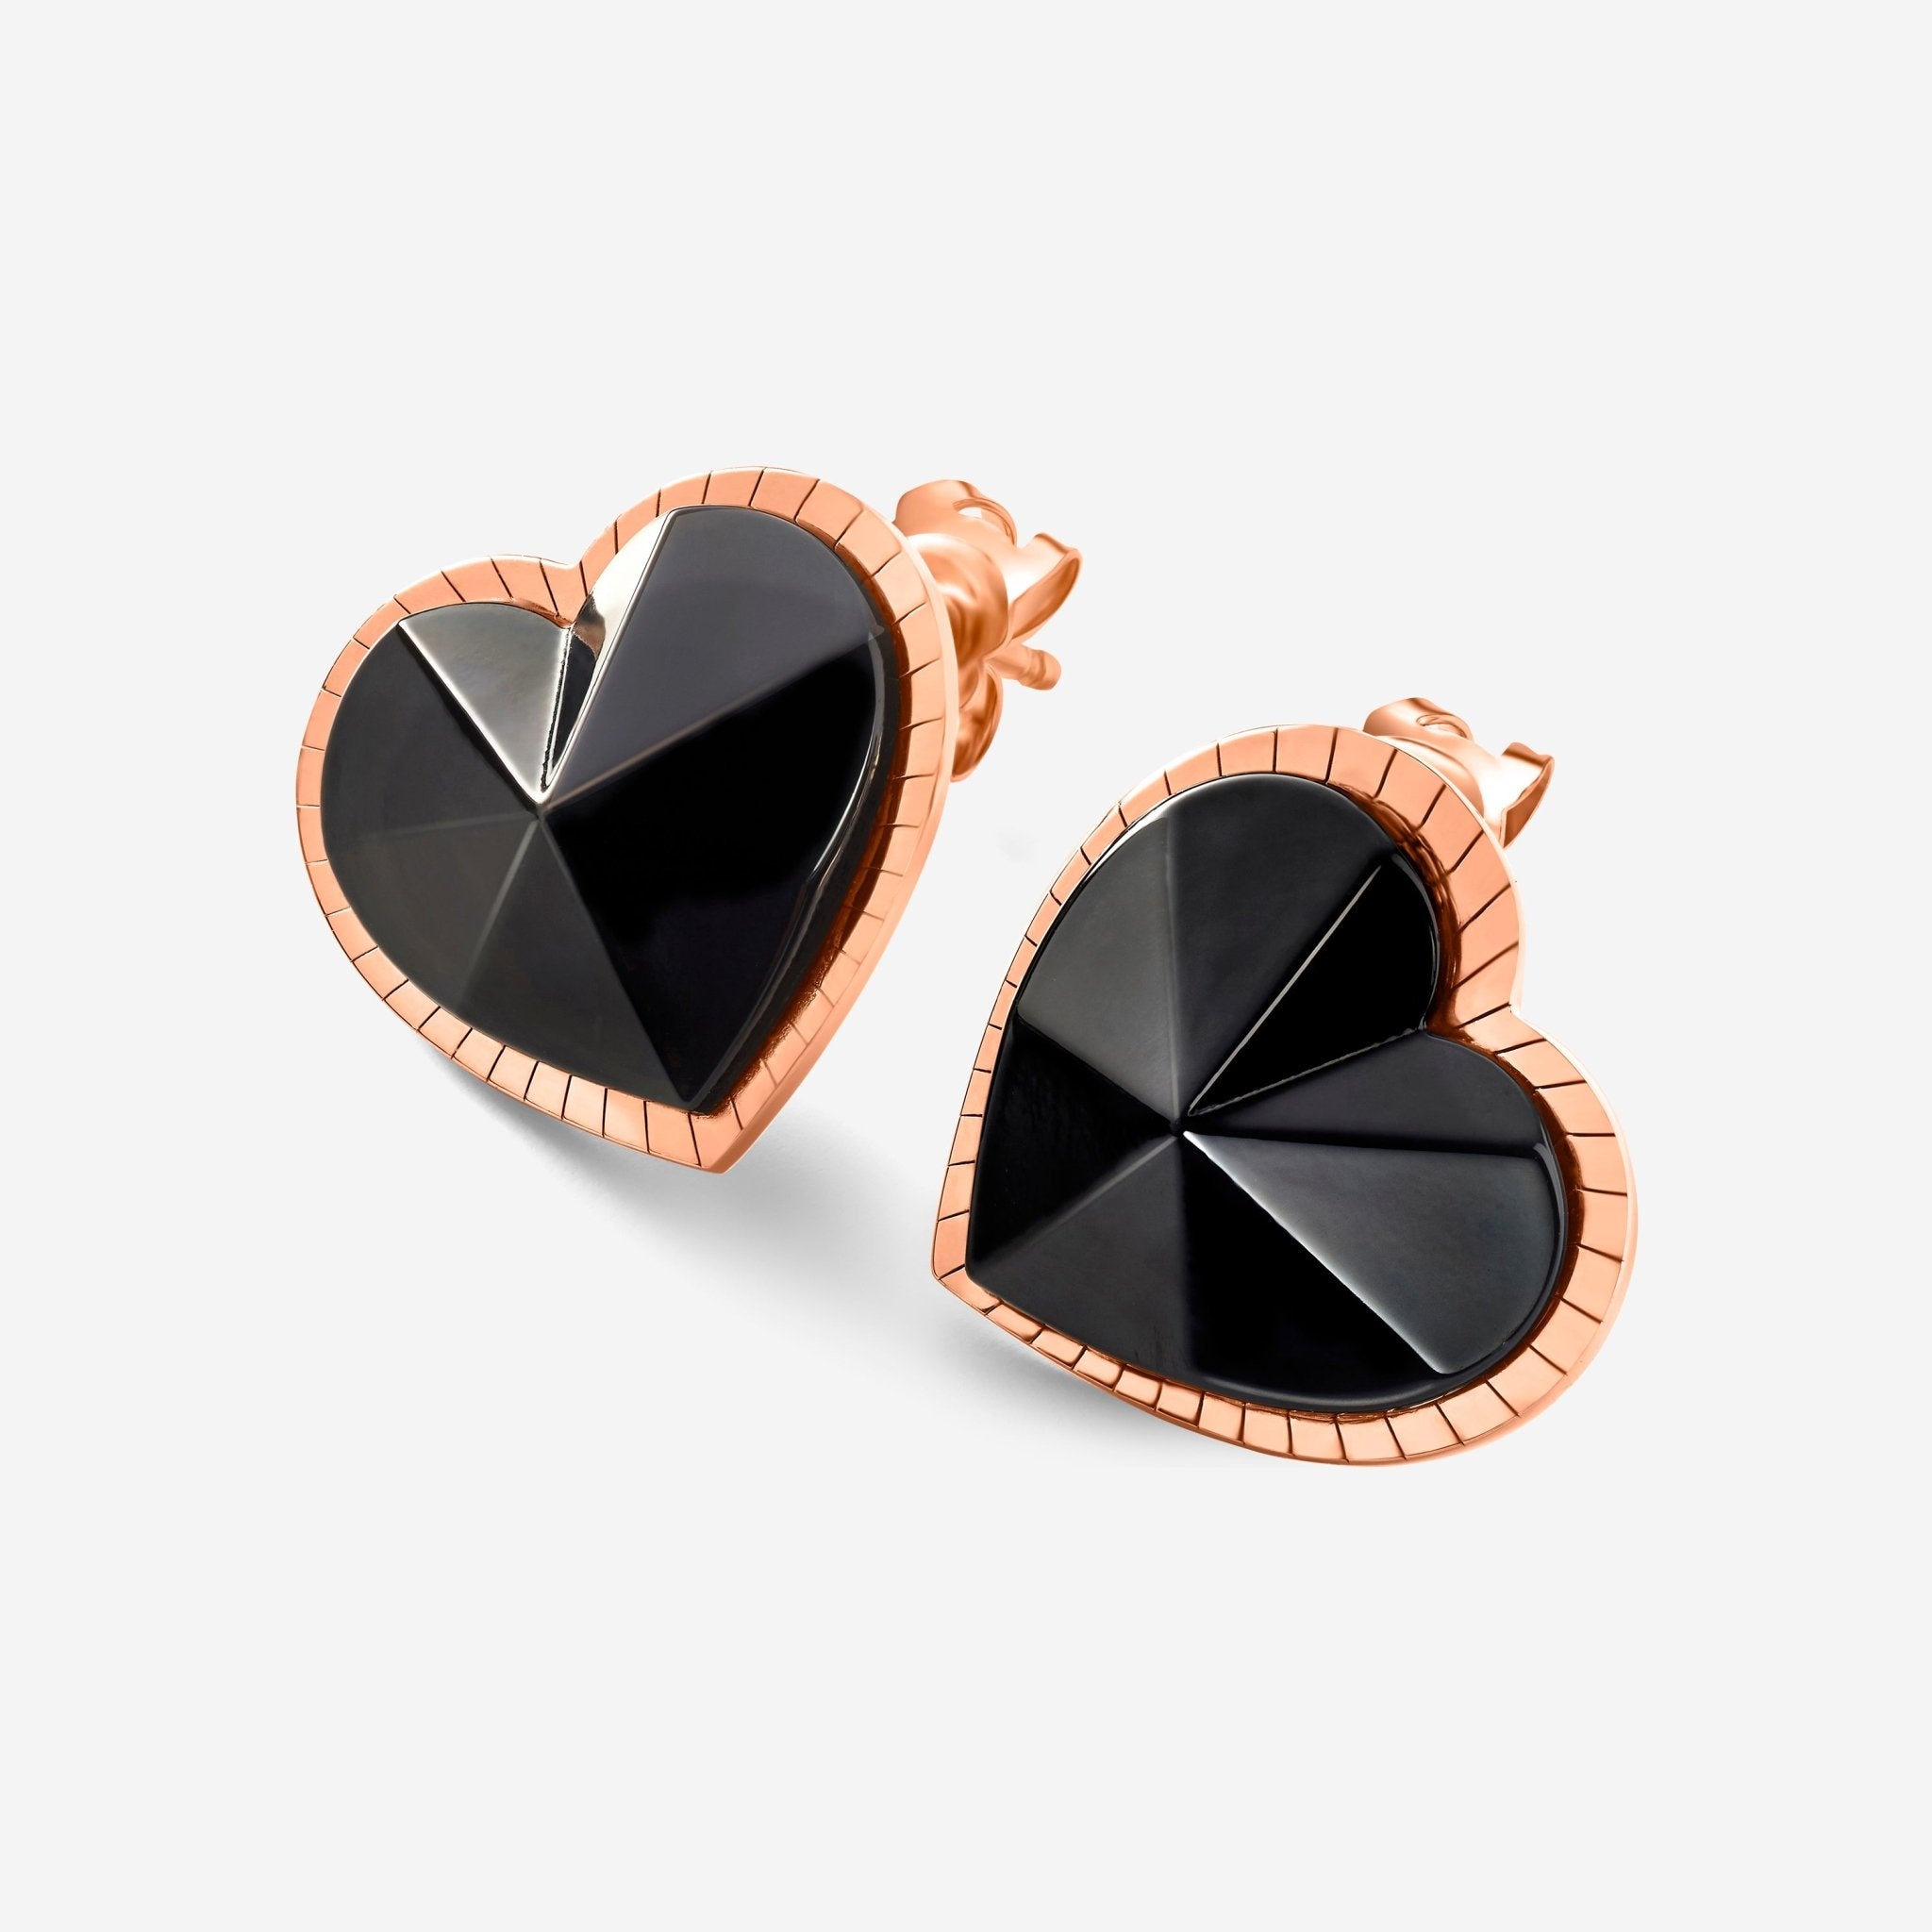 Baccarat 18K Gold Plated on Sterling Silver , Black Crystal Heart Earrings 2812897 - THE SOLIST - Baccarat